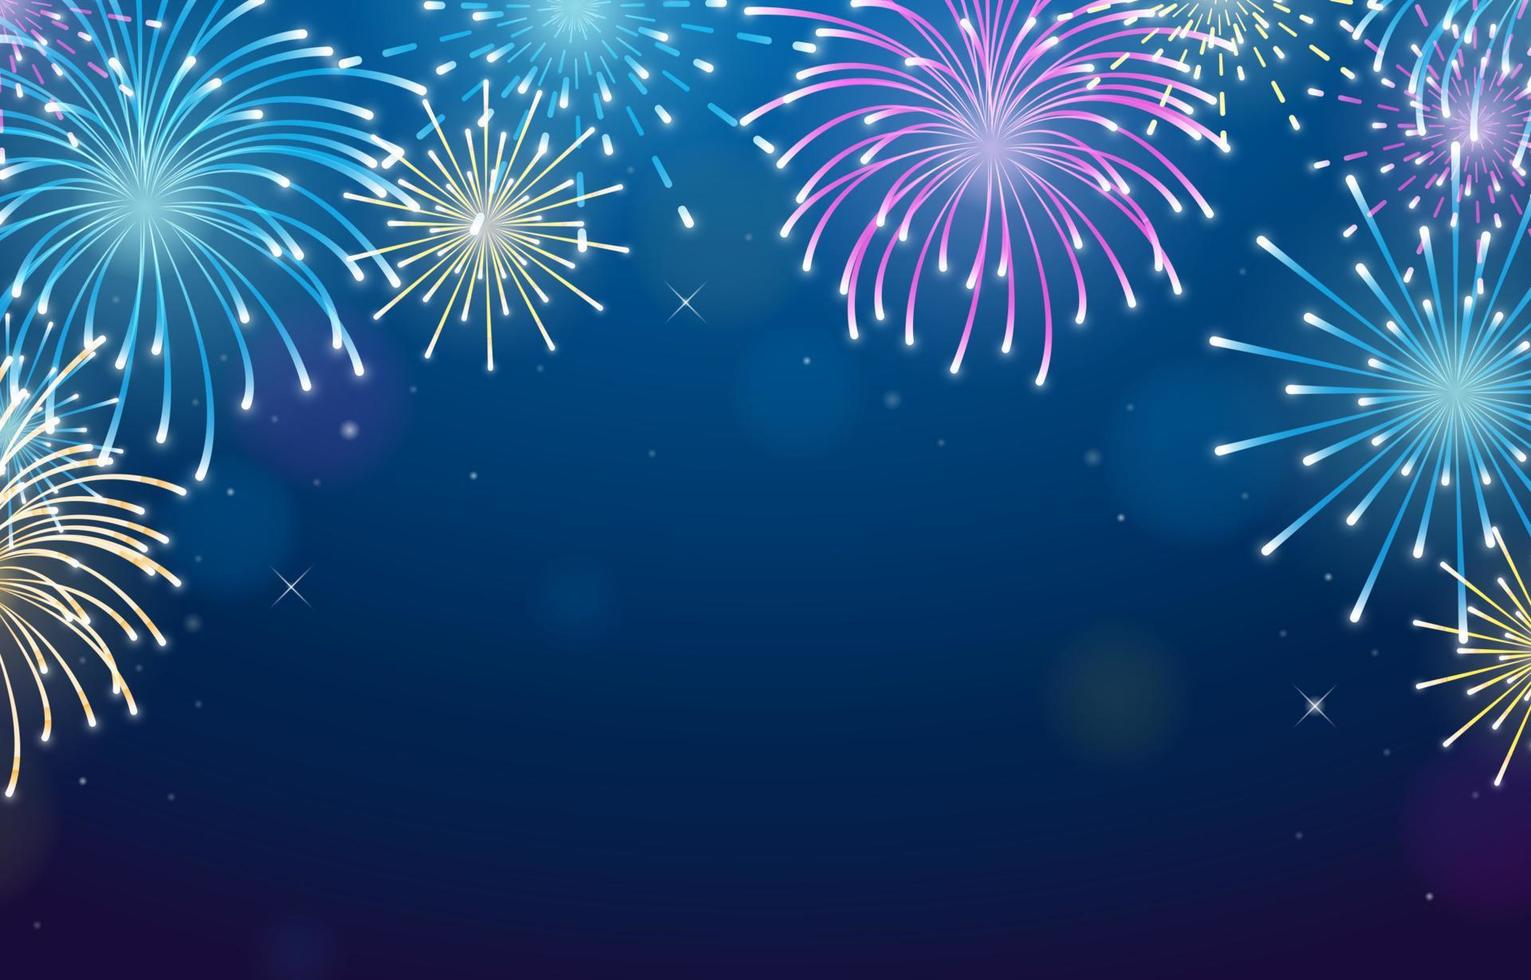 Fireworks in The Night Sky Background vector